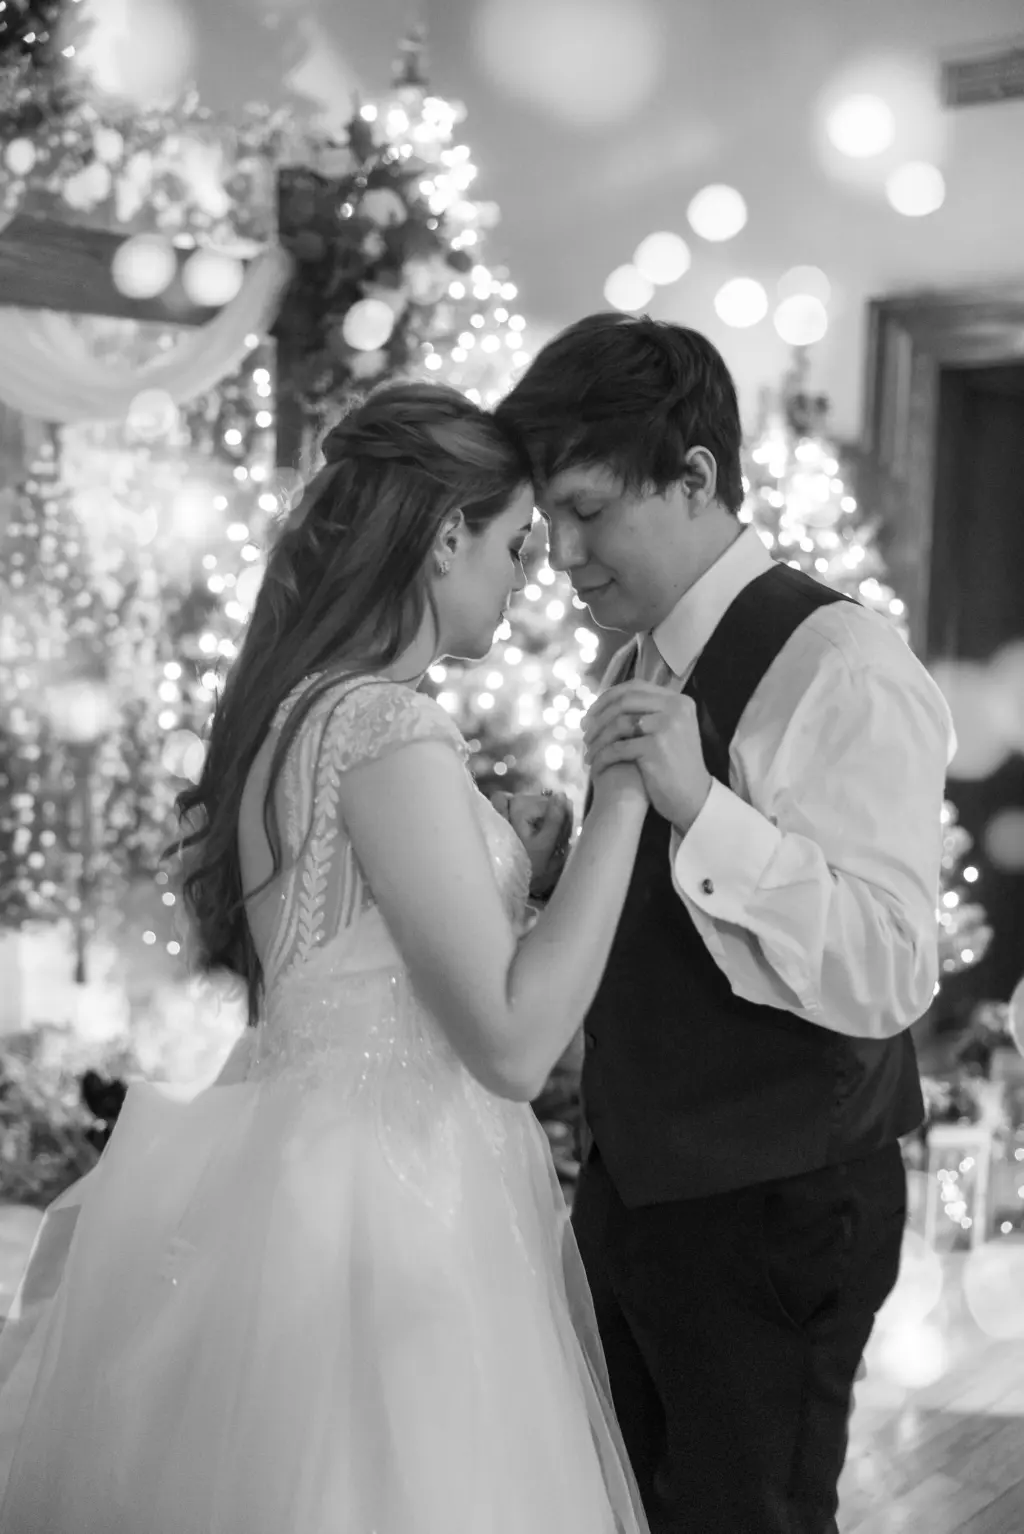 Black and White Intimate Bride and Groom First Dance Wedding Portrait | Tampa Bay Photographer Mary Anna Photography